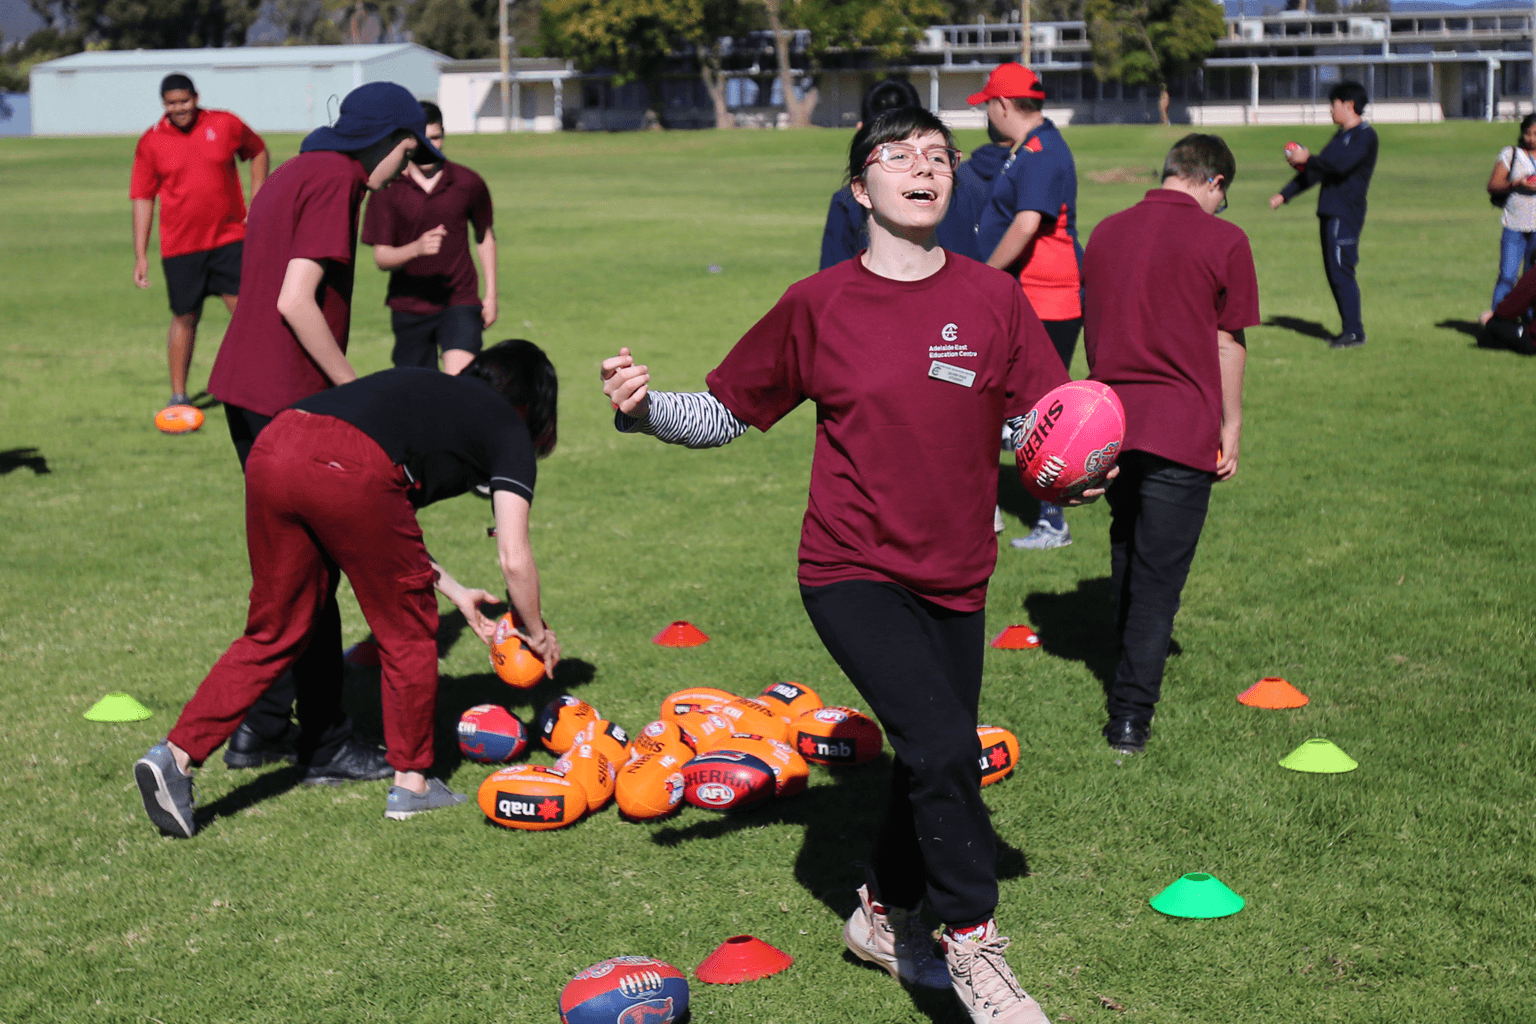 A school student runs with an Australian Rules football, with other students playing int the background